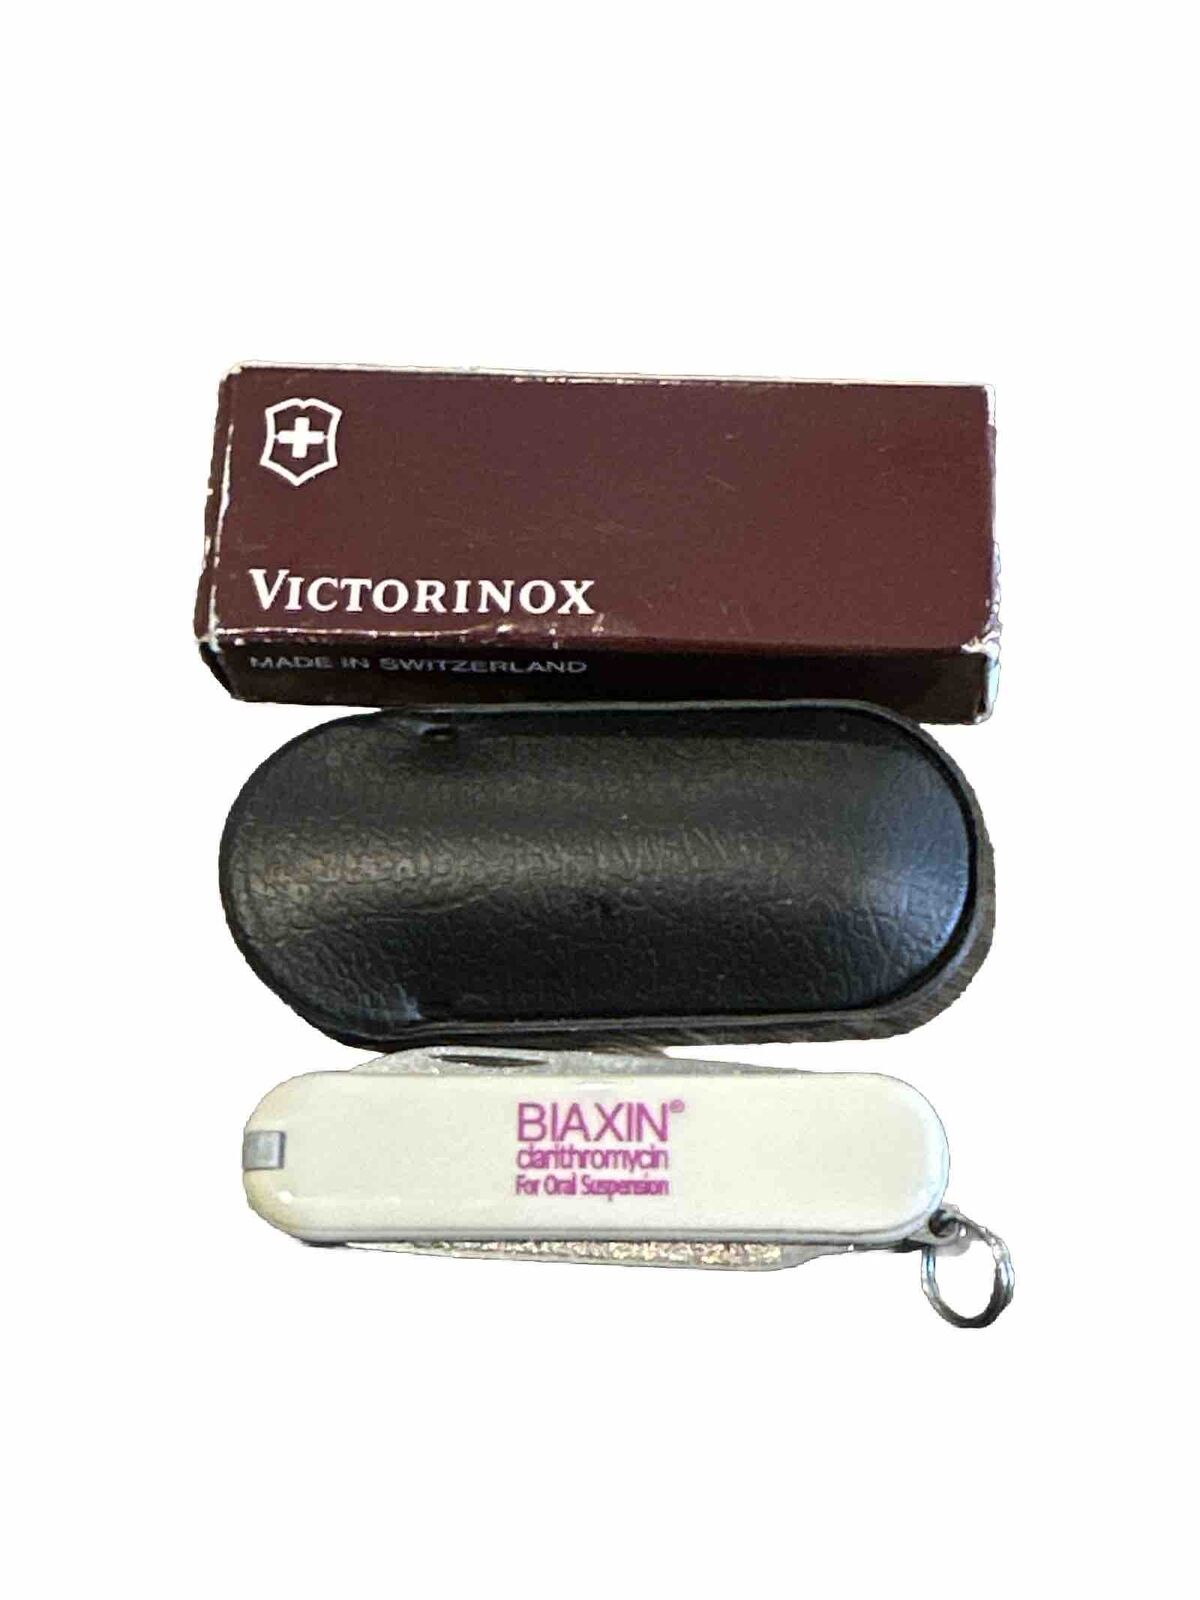 BIAXIN Logo Victorinox Swiss Army Knife Classic SD White 58mm NOS Vintage